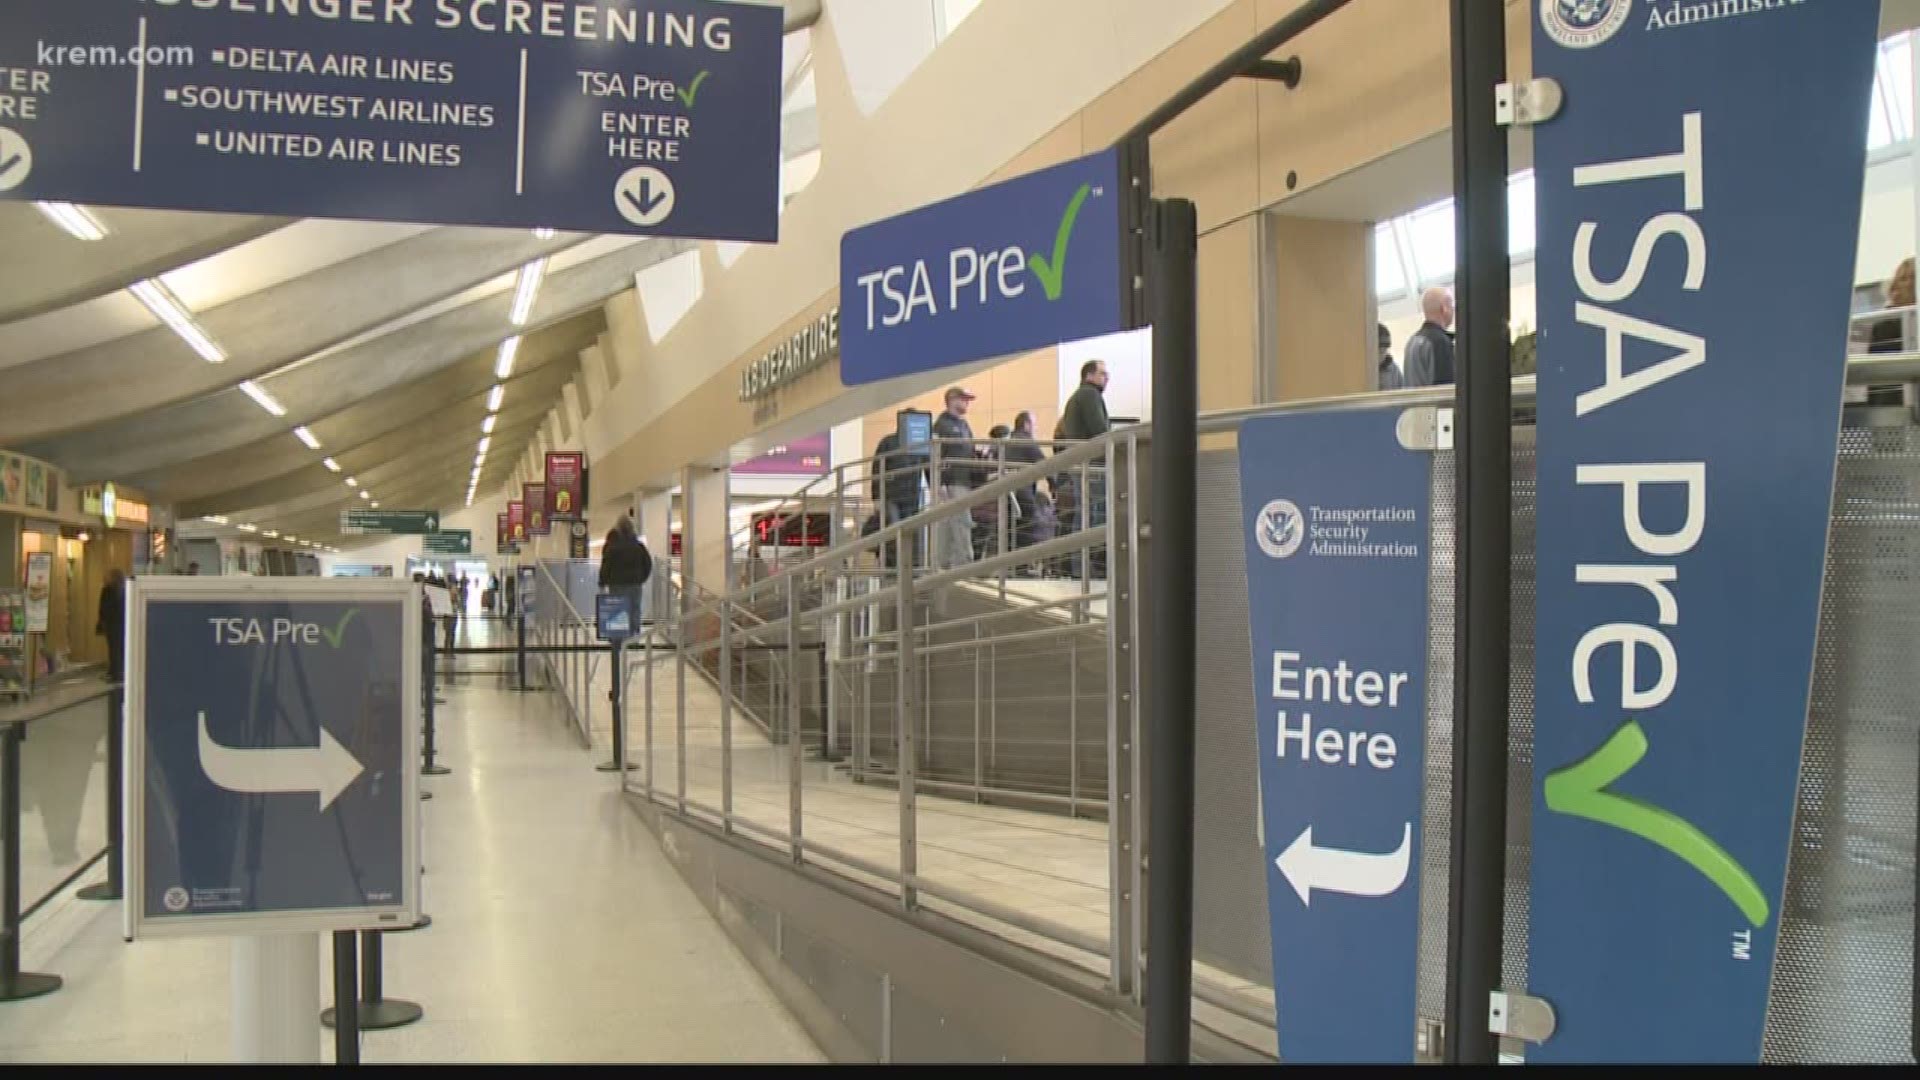 KREM 2's Lindsay Nadrich spoke with the TSA to find out why.